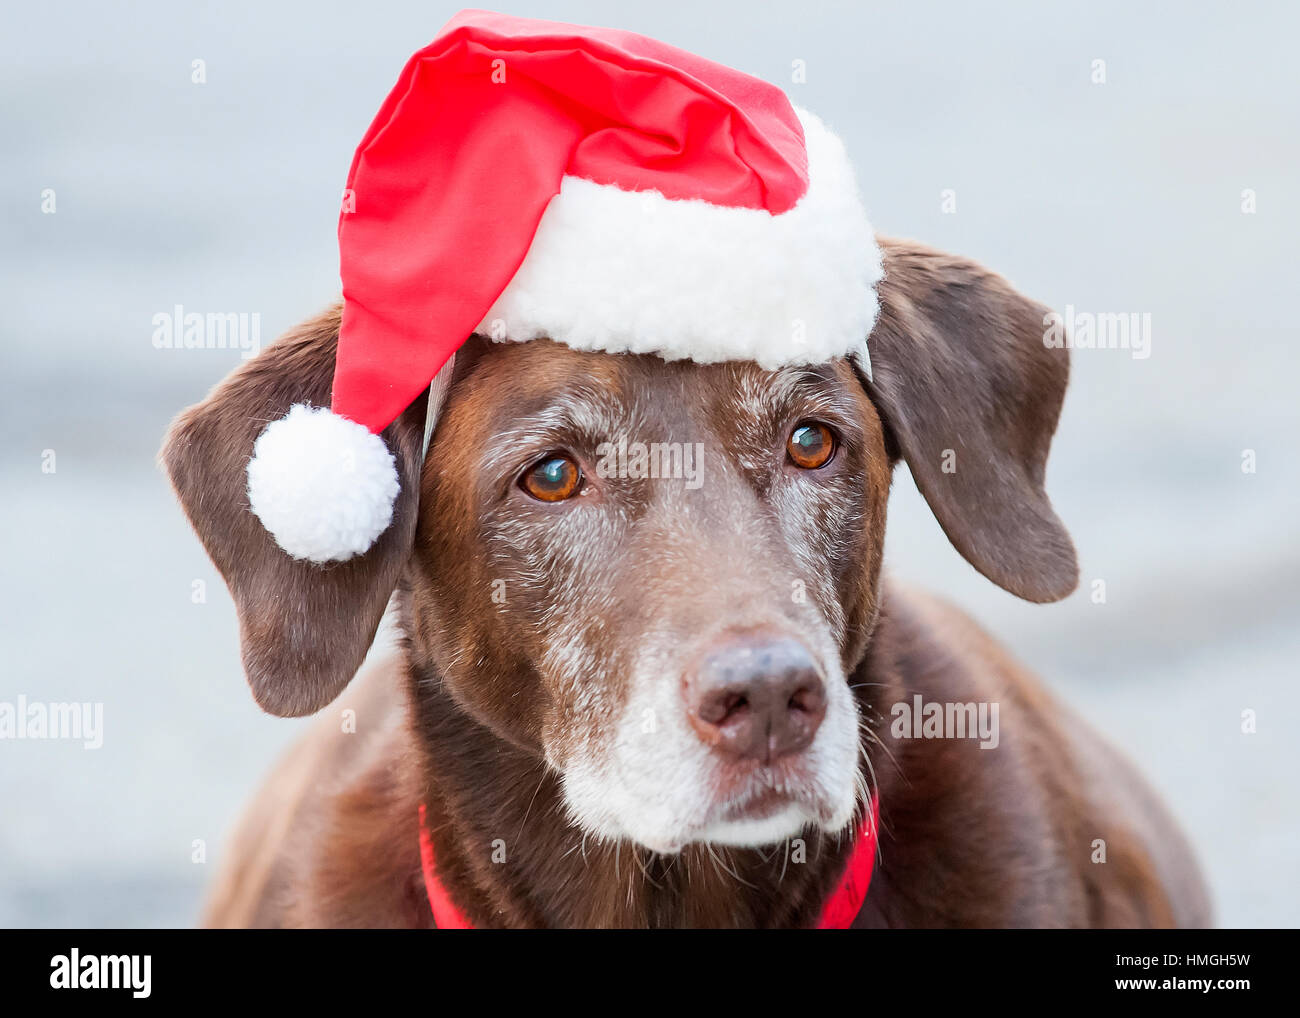 Beautiful chocolate lab senior dog close up headshot wearing santa hat with ears cocked and red collar Stock Photo